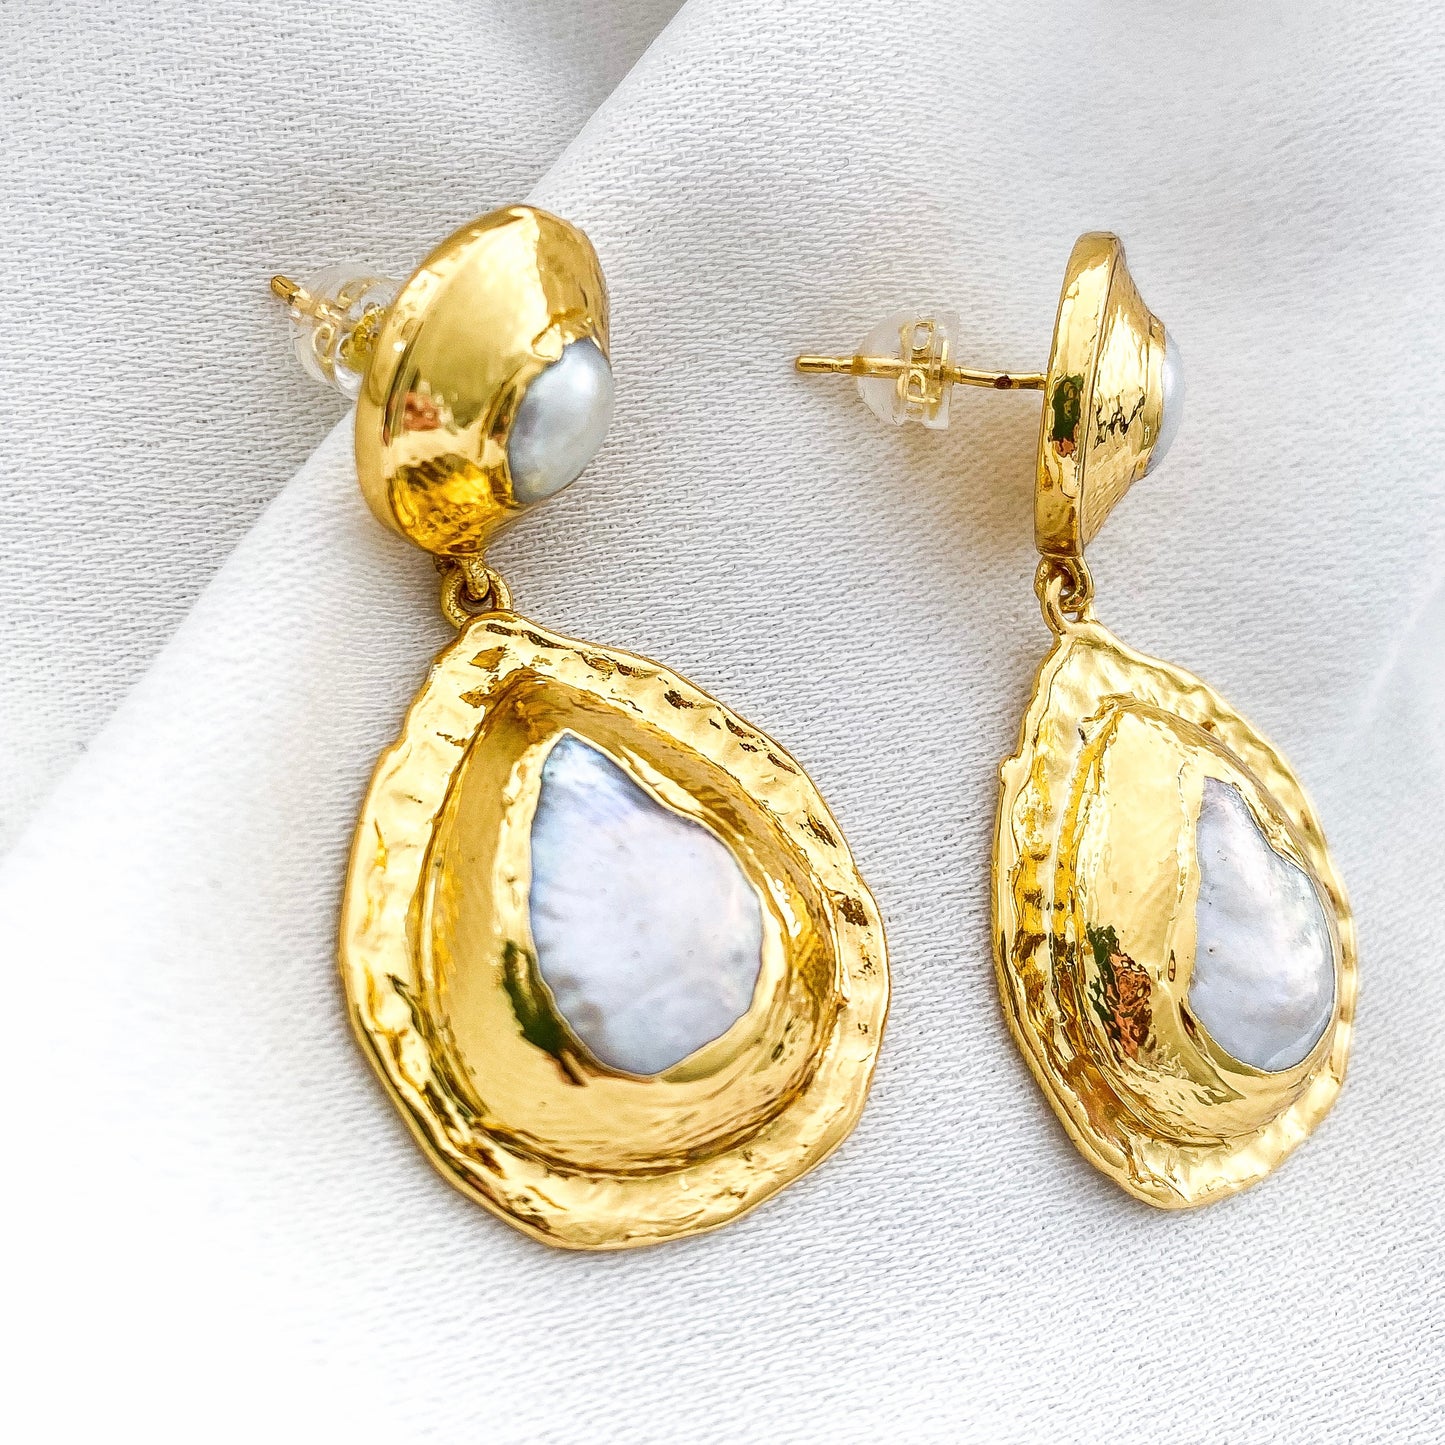 Deluxe Luxury 24k Gold Plated Freshwater Pearl Coin Earrings